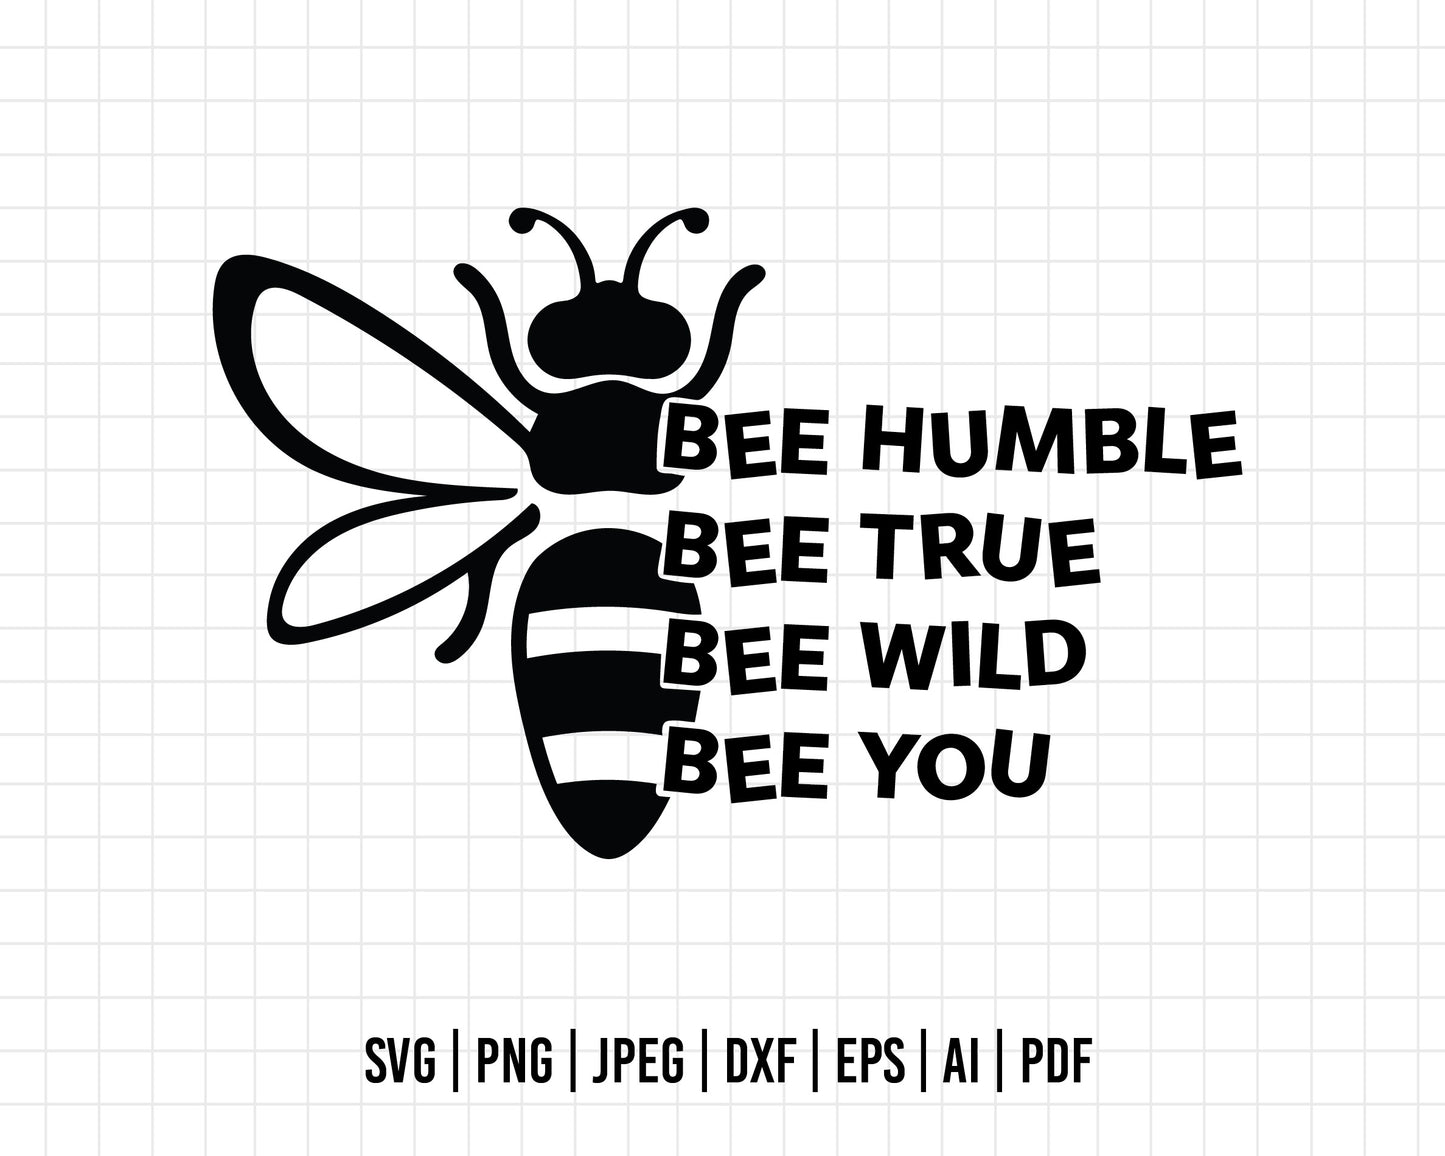 COD211- Bee humble, bee true, bee wild, bee you svg, Bee svg, Mom Svg, Honey Cut File